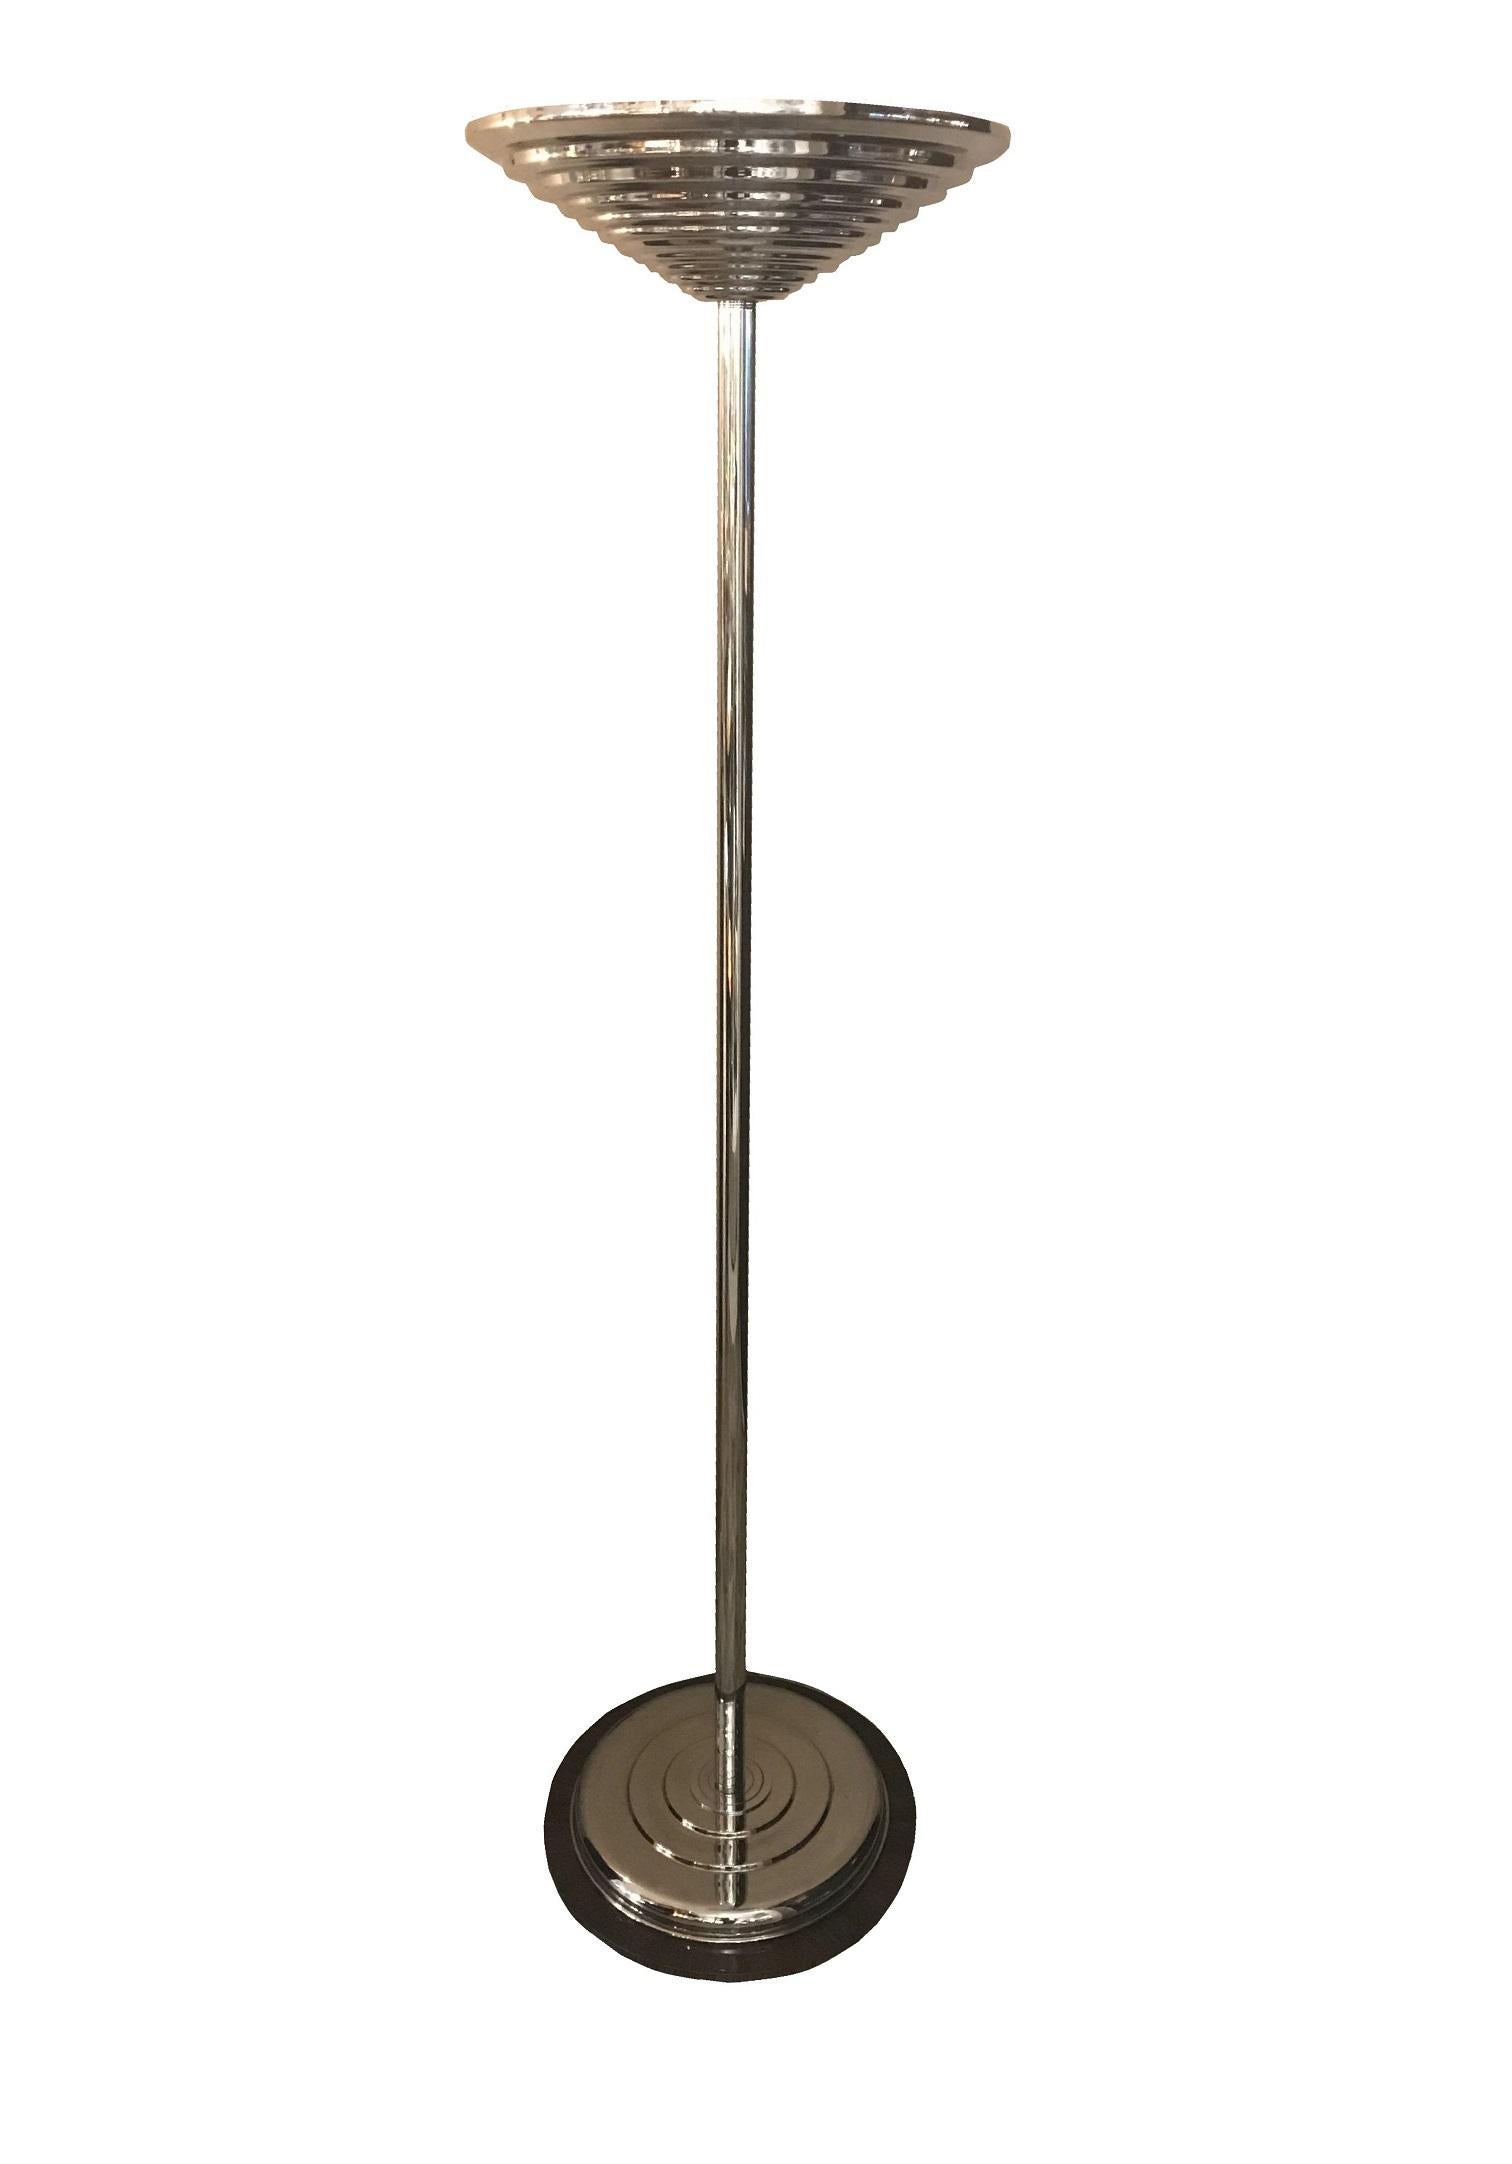 2 floor lamps Art Deco

Materials: wood, glass, chrome
France
1930
You want to live in the golden years, those are the floor lamps that your project needs.
We have specialized in the sale of Art Deco and Art Nouveau styles since 1982.
Pushing the